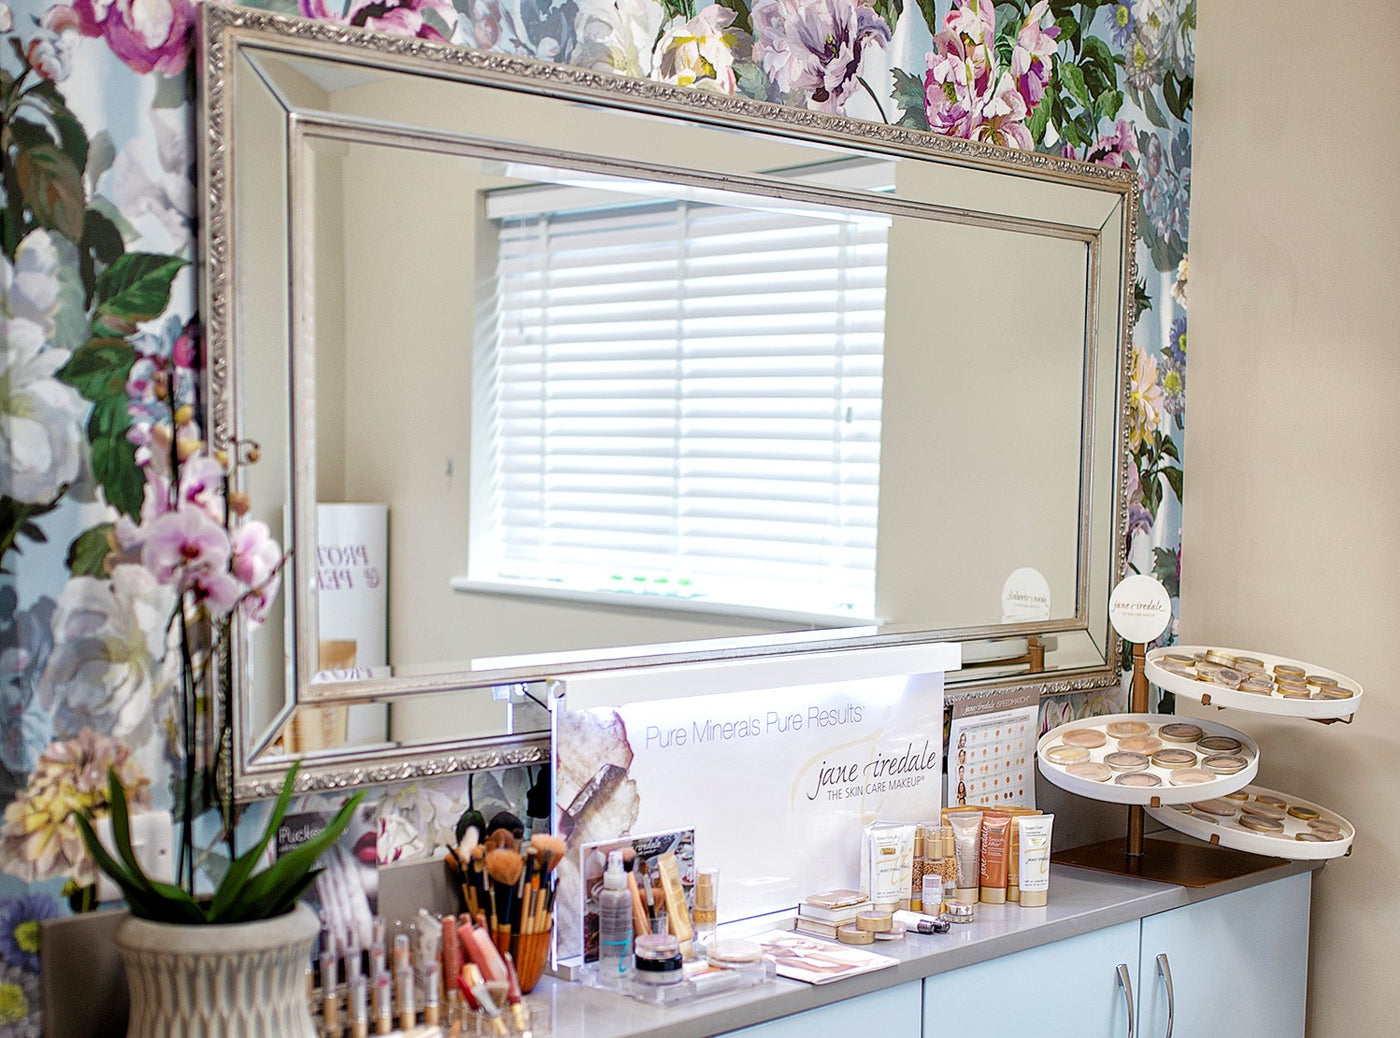 Exclusive Beauty & Eyebrow Design  Private Clinic in Newry Advanced Nutrition Programme & Jane Iredale make up Environ Facials using Advanced DF Technology,  Cool Peels, Microneedling, Radiofrequency, Bespoke Facials, Semi permanent Makeup